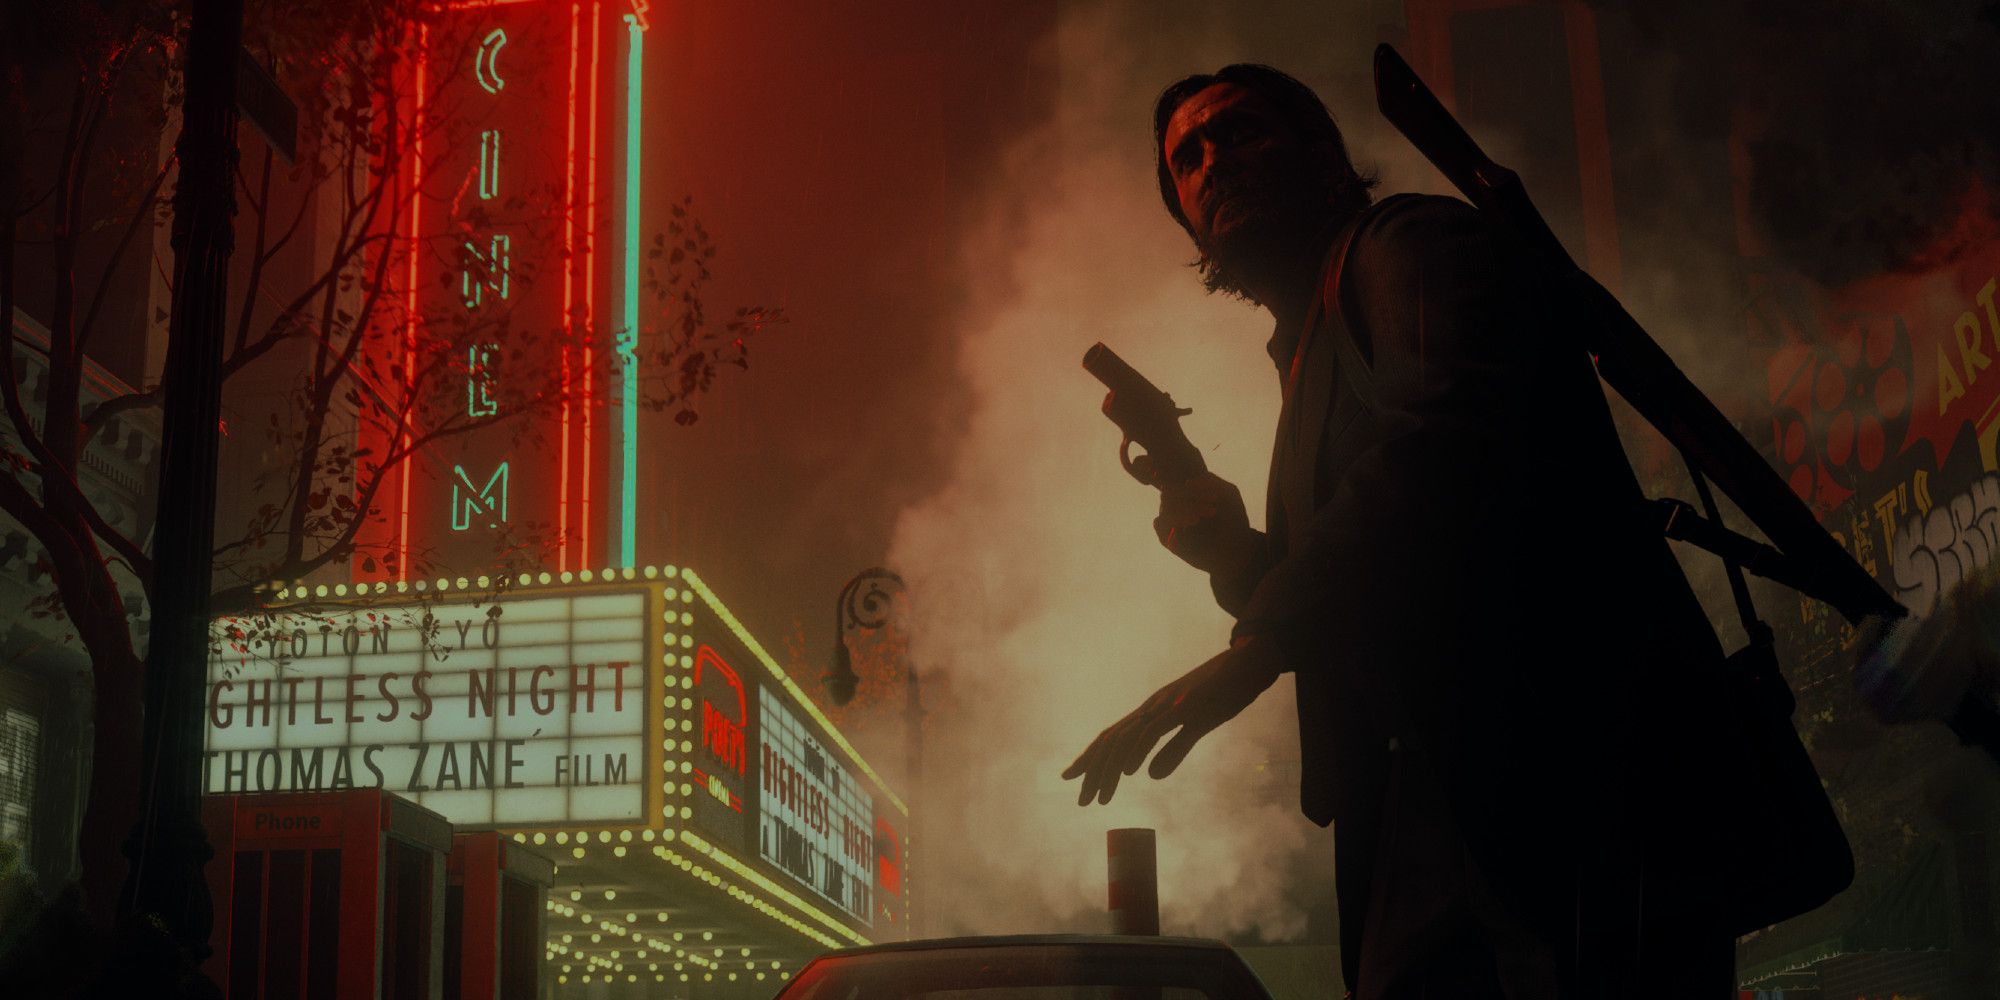 Alan Wake in a dark New York street lit up by the glow of a nearby theatre sign in the background